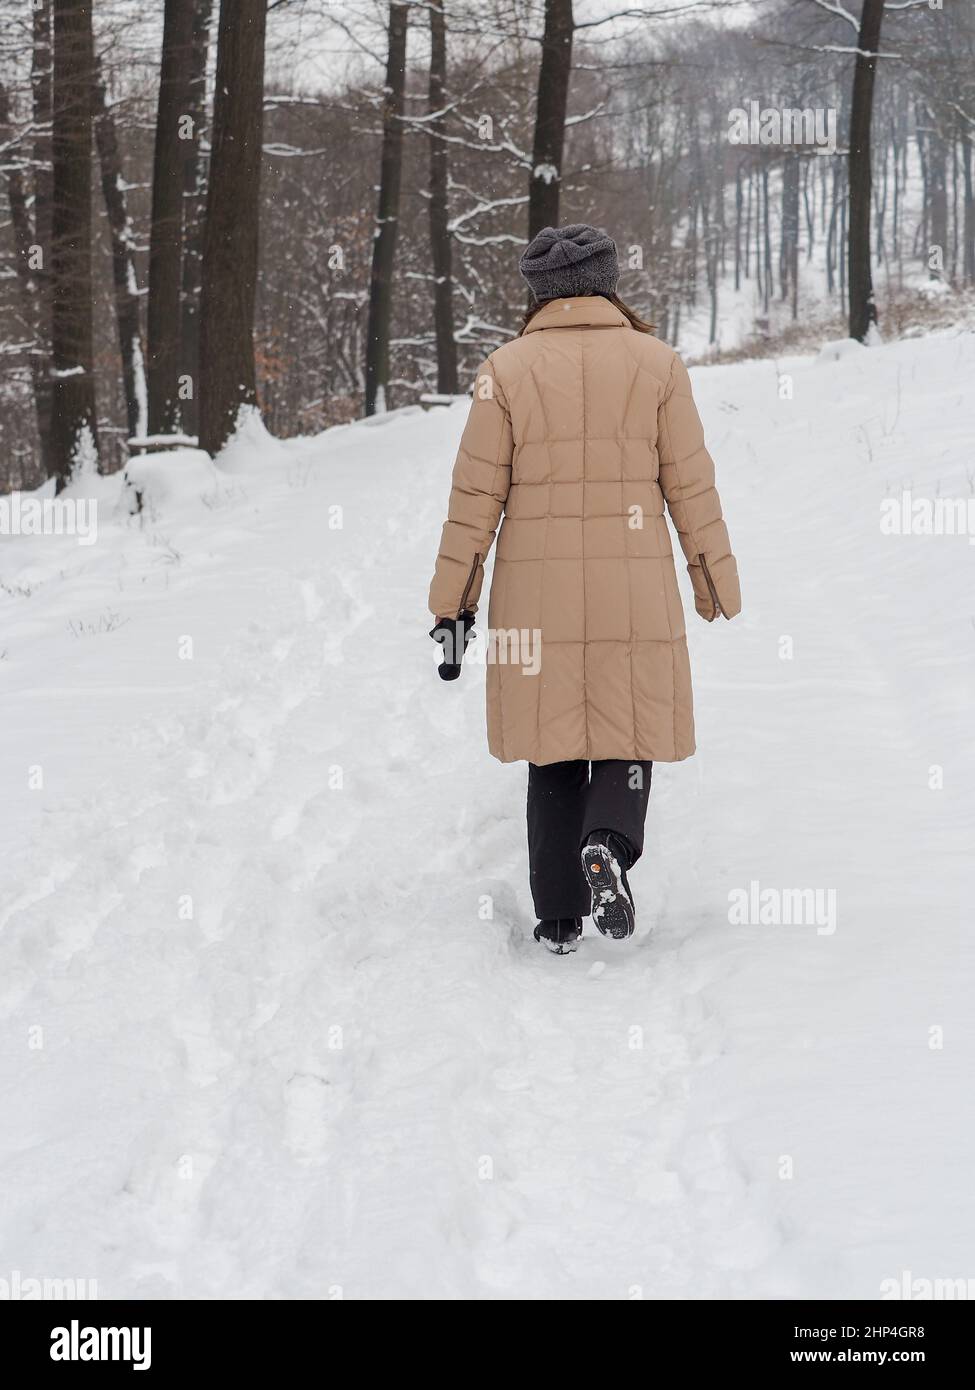 A woman in a long beige down coat goes for a walk in the freshly snow-covered forest. Stock Photo